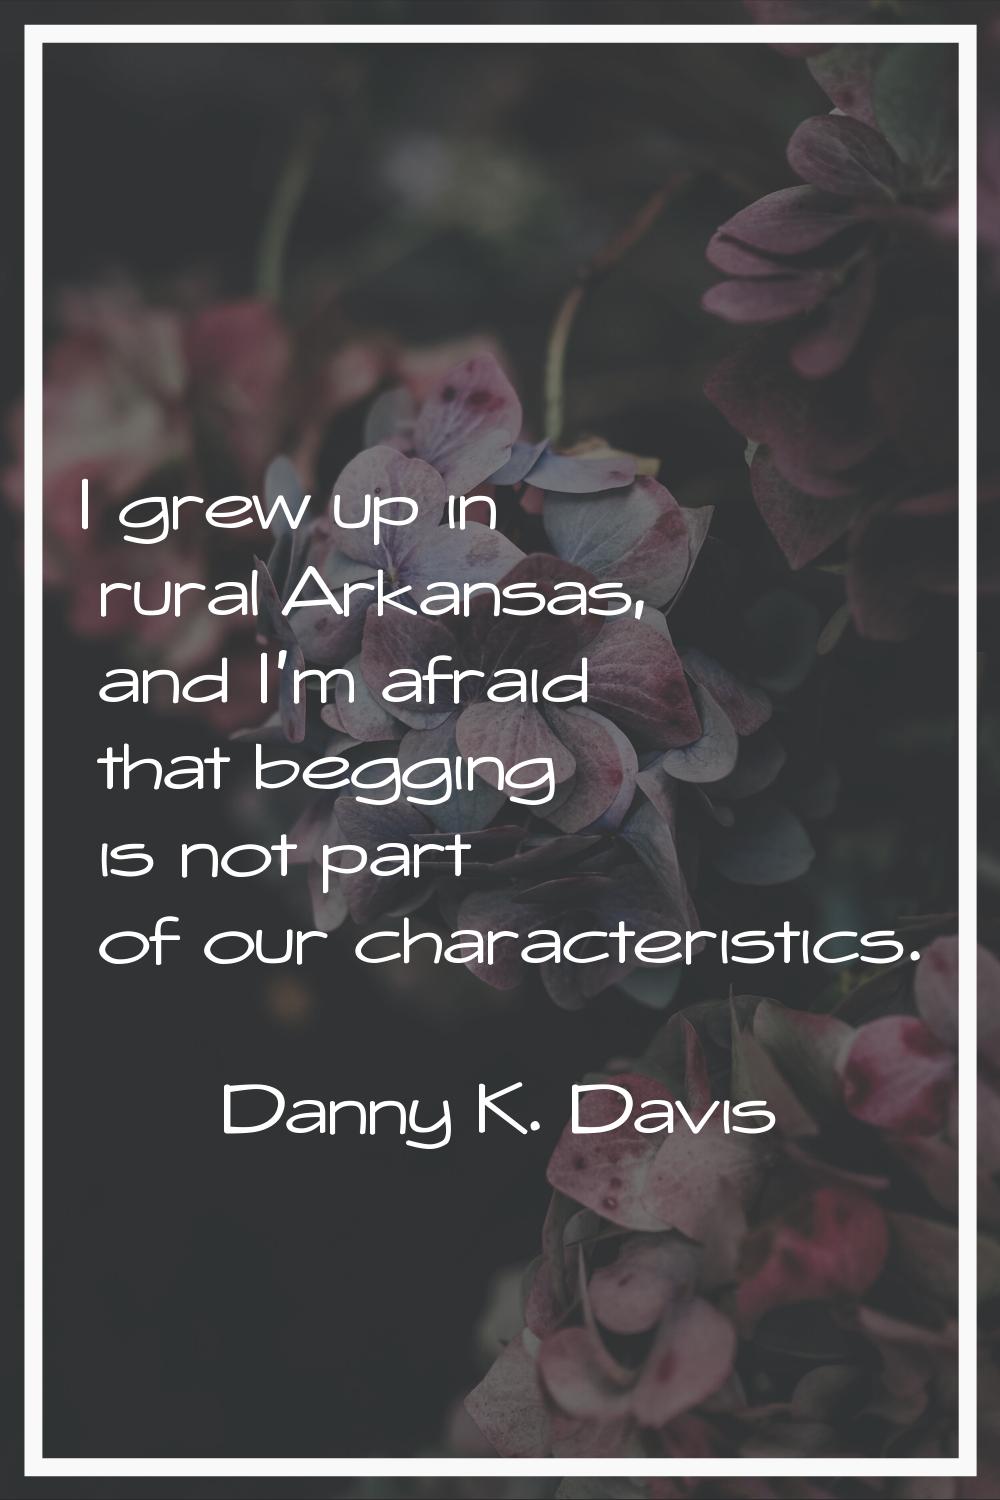 I grew up in rural Arkansas, and I'm afraid that begging is not part of our characteristics.